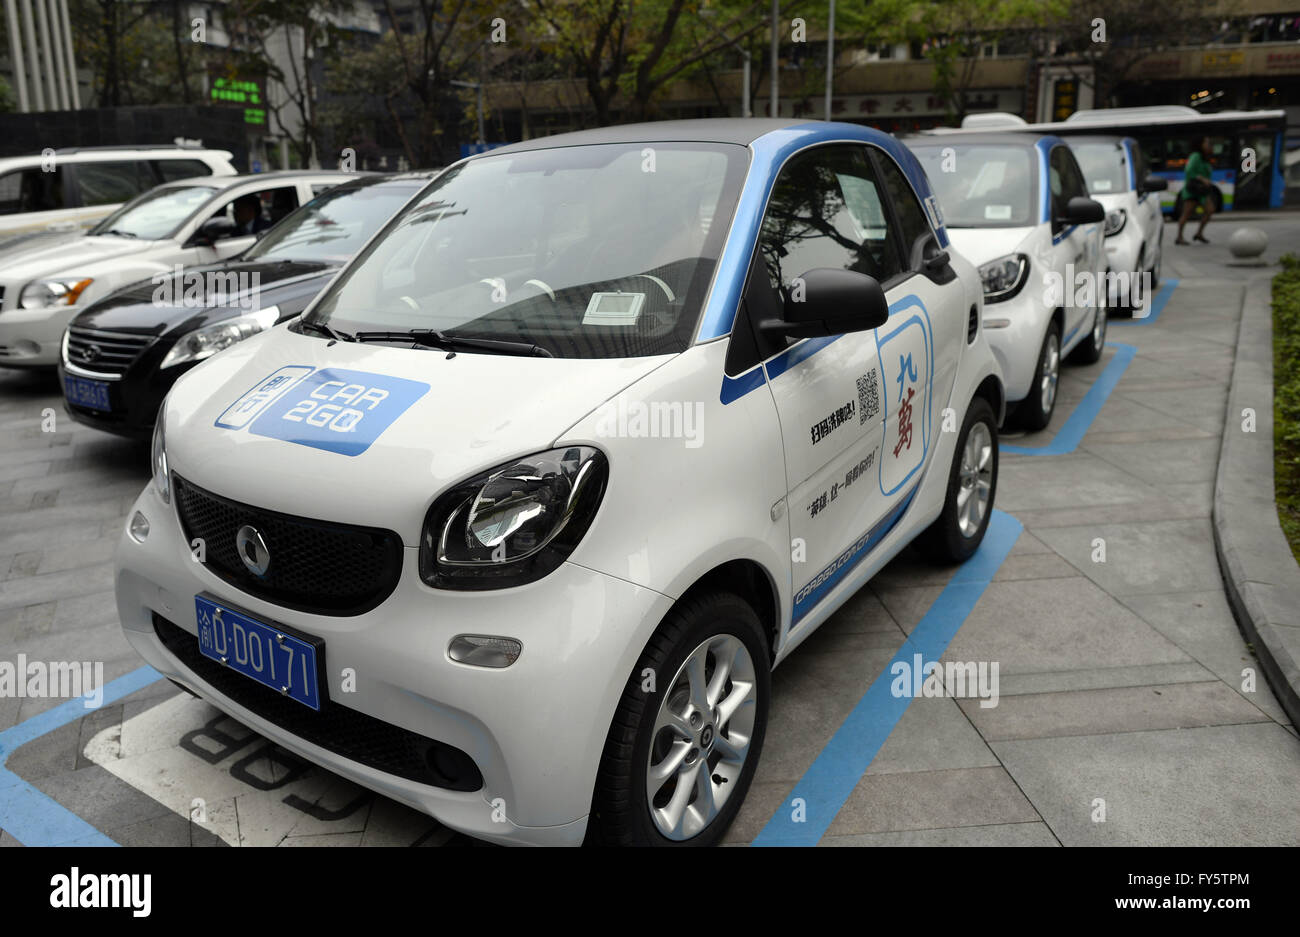 Chongqing, Chongqing, CHN. 16th Apr, 2016. Chongqing, CHINA - April 16 2016: (EDITORIAL USE ONLY. CHINA OUT) The largest car-sharing brand Â¡Â°car2goÂ¡Â± starts in Chongqing on April 15, the first city in Asia. Usually you need to fill in the form, buy a insurance when you want to rent a car. But if you download the APP Â¡Â°car2goÂ¡Â±, and provide complete personal information and paryment information, you can search available car and drive it and park it properly onlline. This would alleviate the strain of running a car, also ease traffic congestion and reduce carbon dioxide emissions.Â¾ÃÃ Stock Photo